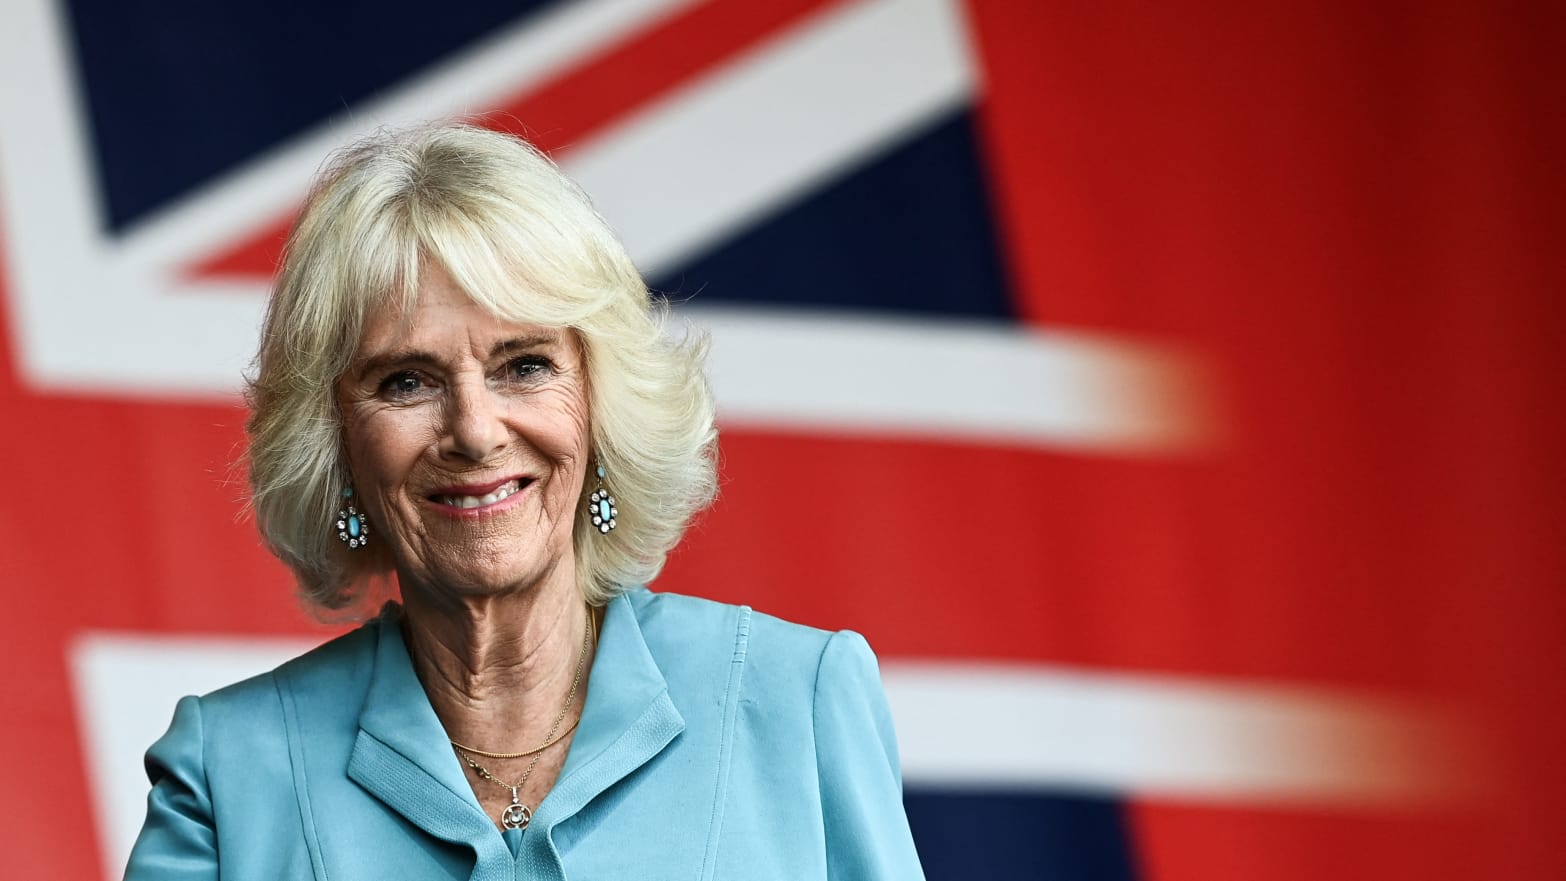 Britain's Queen Camilla smiles as she stands under a giant banner of the British Union flag during a visit to a festival in celebration of British and French culture and business at Place de la Bourse in Bordeaux, France, on September 22, 2023.